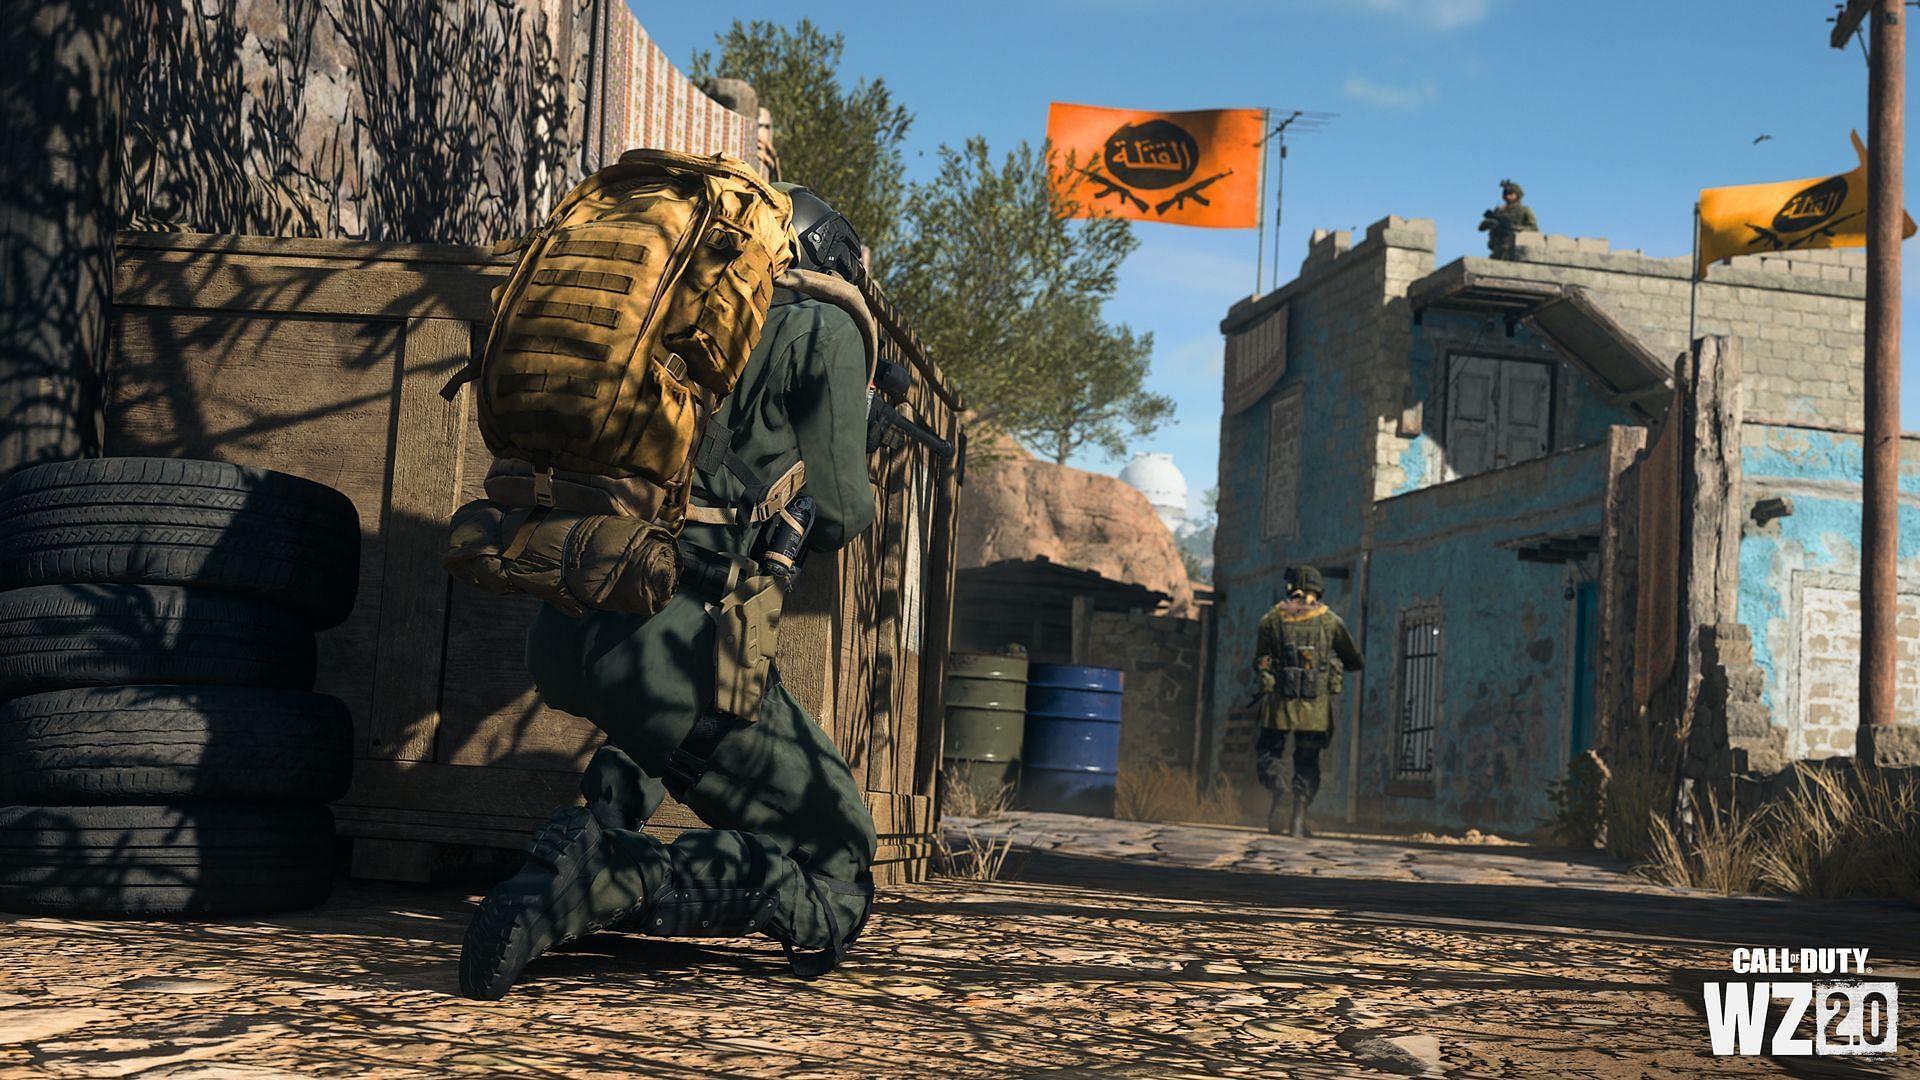 Be the first to clear a Stronghold for Loadout and Black Site Key (Image via Activision)